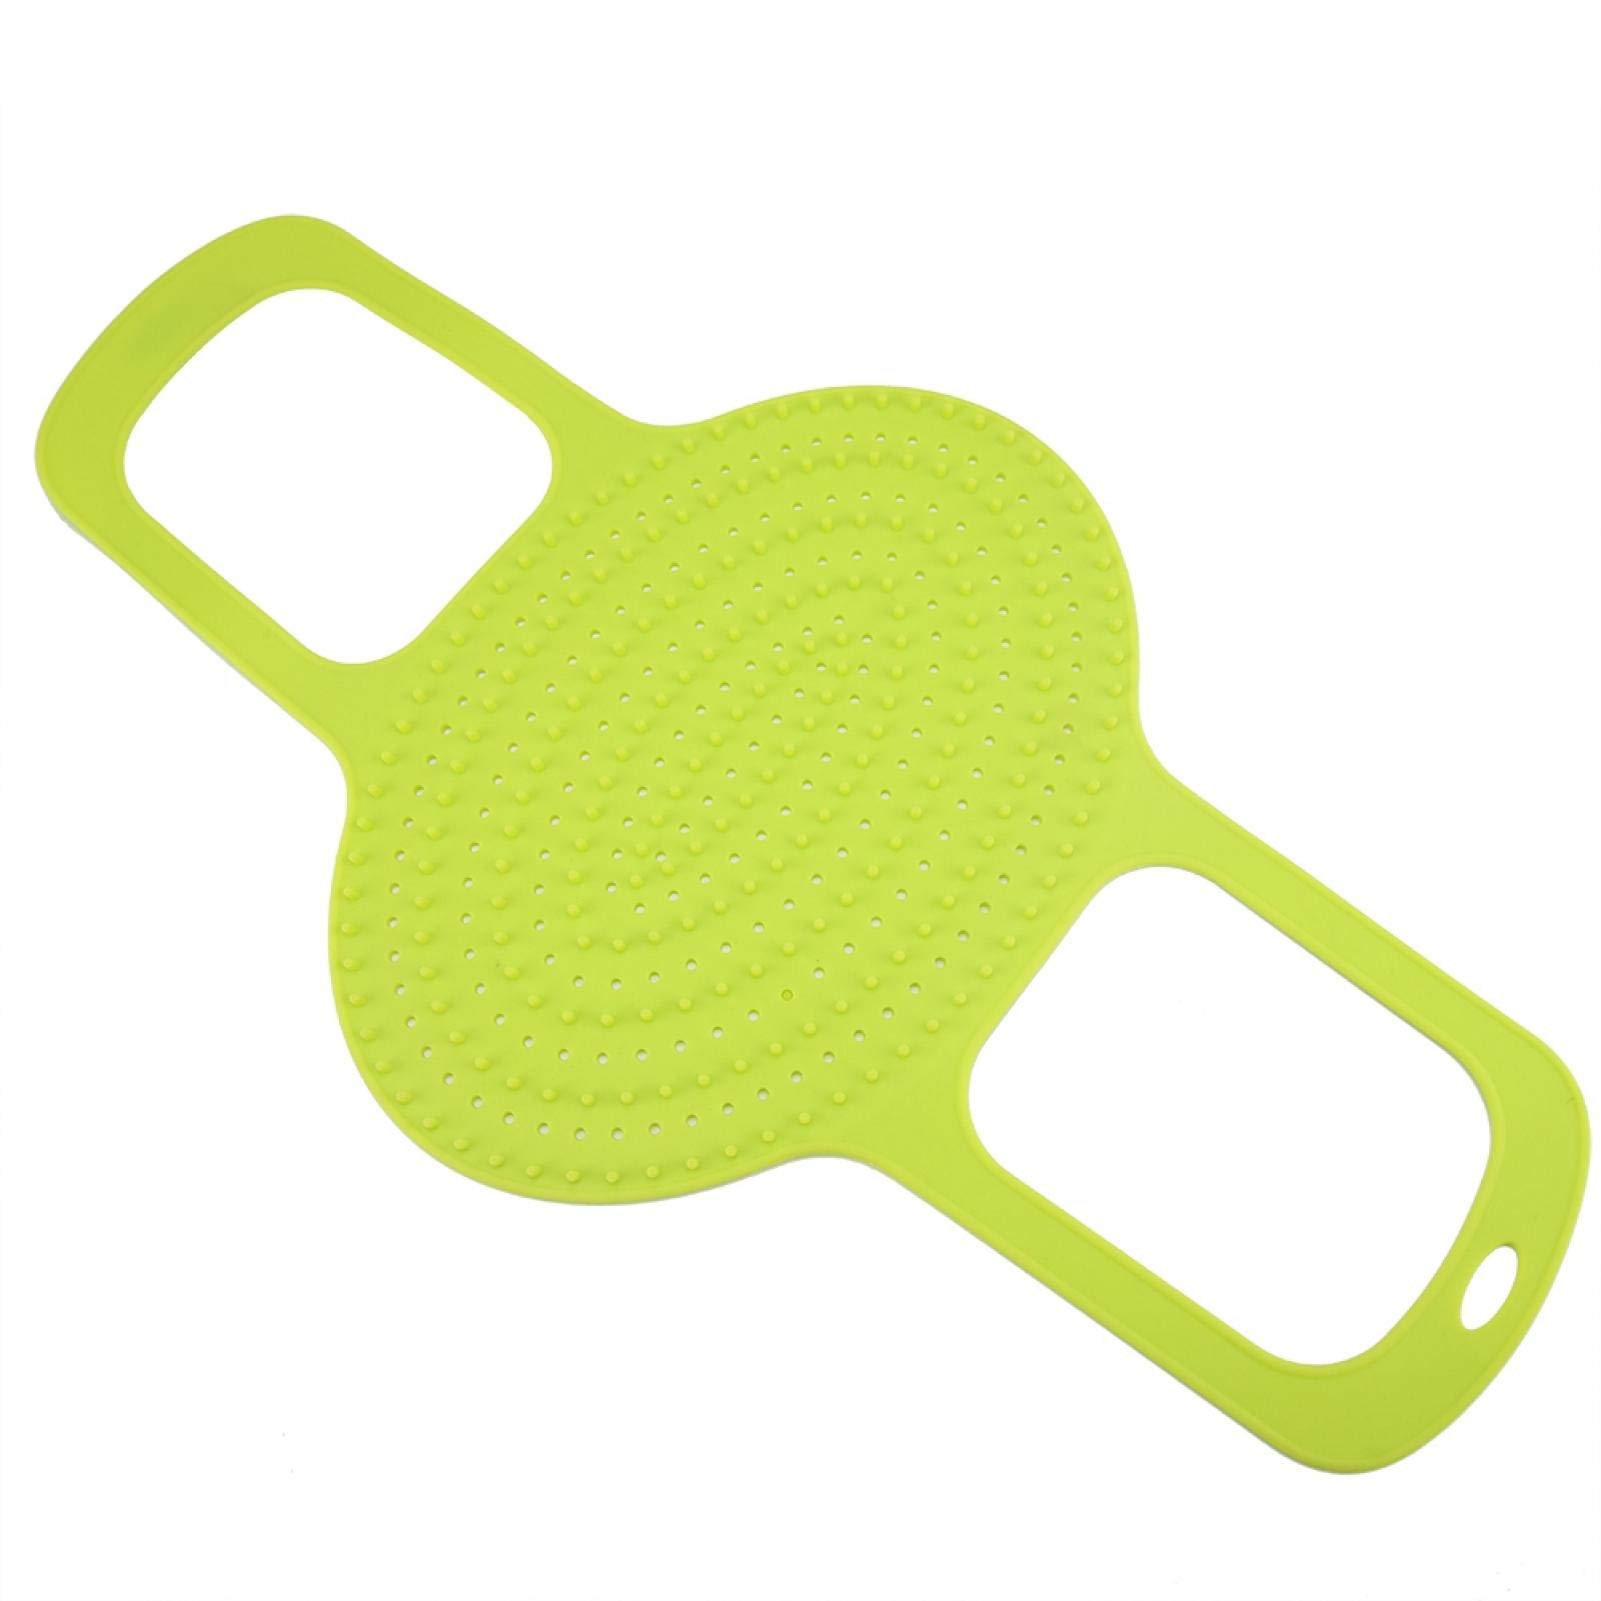 Silicone Turkey Lifter, Heat Resistant Non-Stick Poultry Lifter Turkey Roasting Sling Home Cooking Chicken Turkey Meat Lifter Mat Baking Pan Kitchen Tool, 23.2 x 12.4 in (Green)